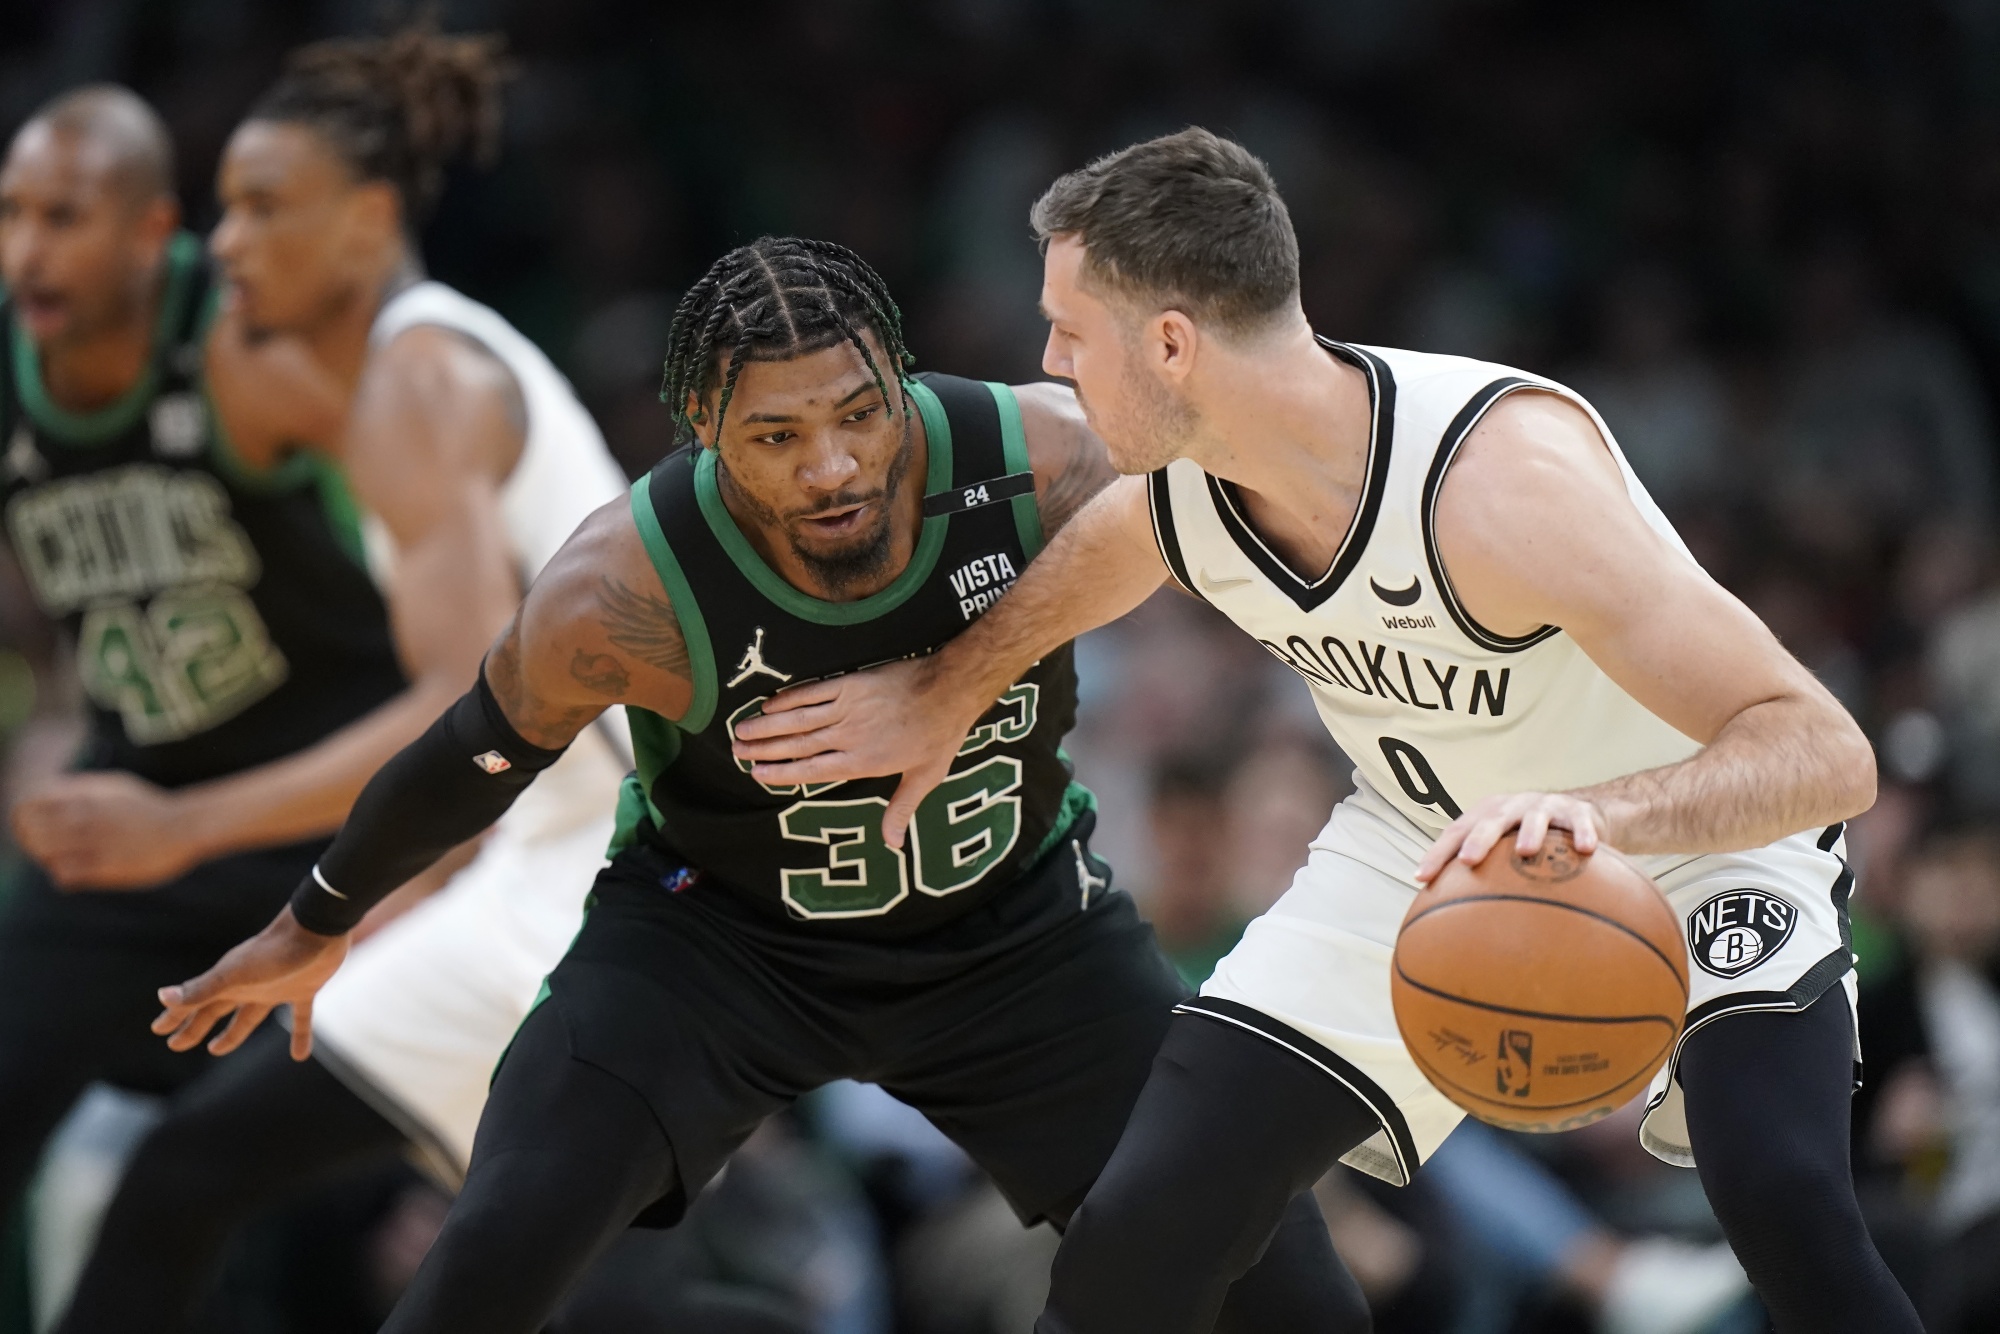 Celtics' Marcus Smart Is NBA Defensive Player of the Year - Bloomberg